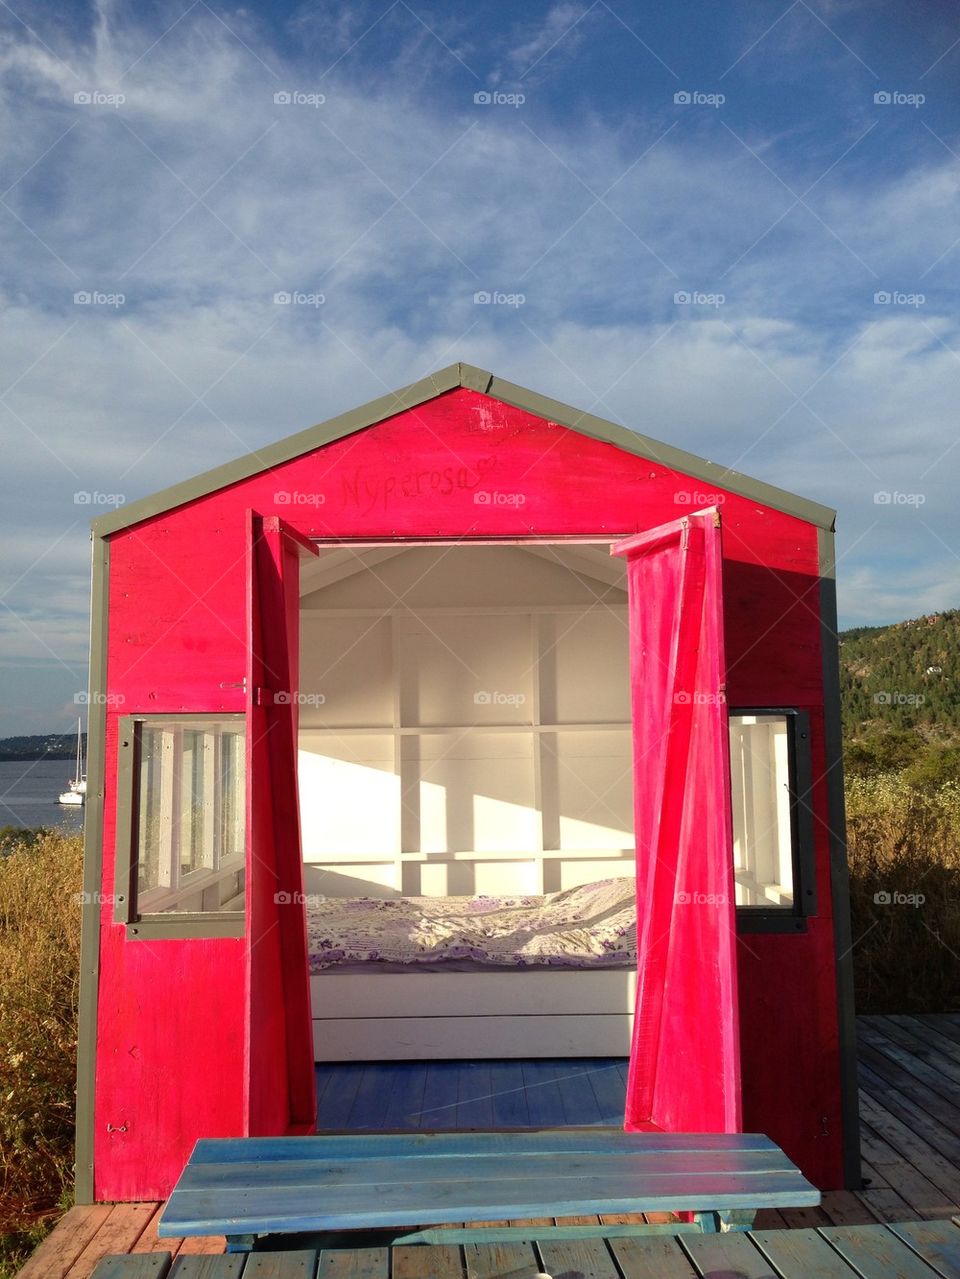 Small cabins (små hytter) - An art project in Oslofjord Norway